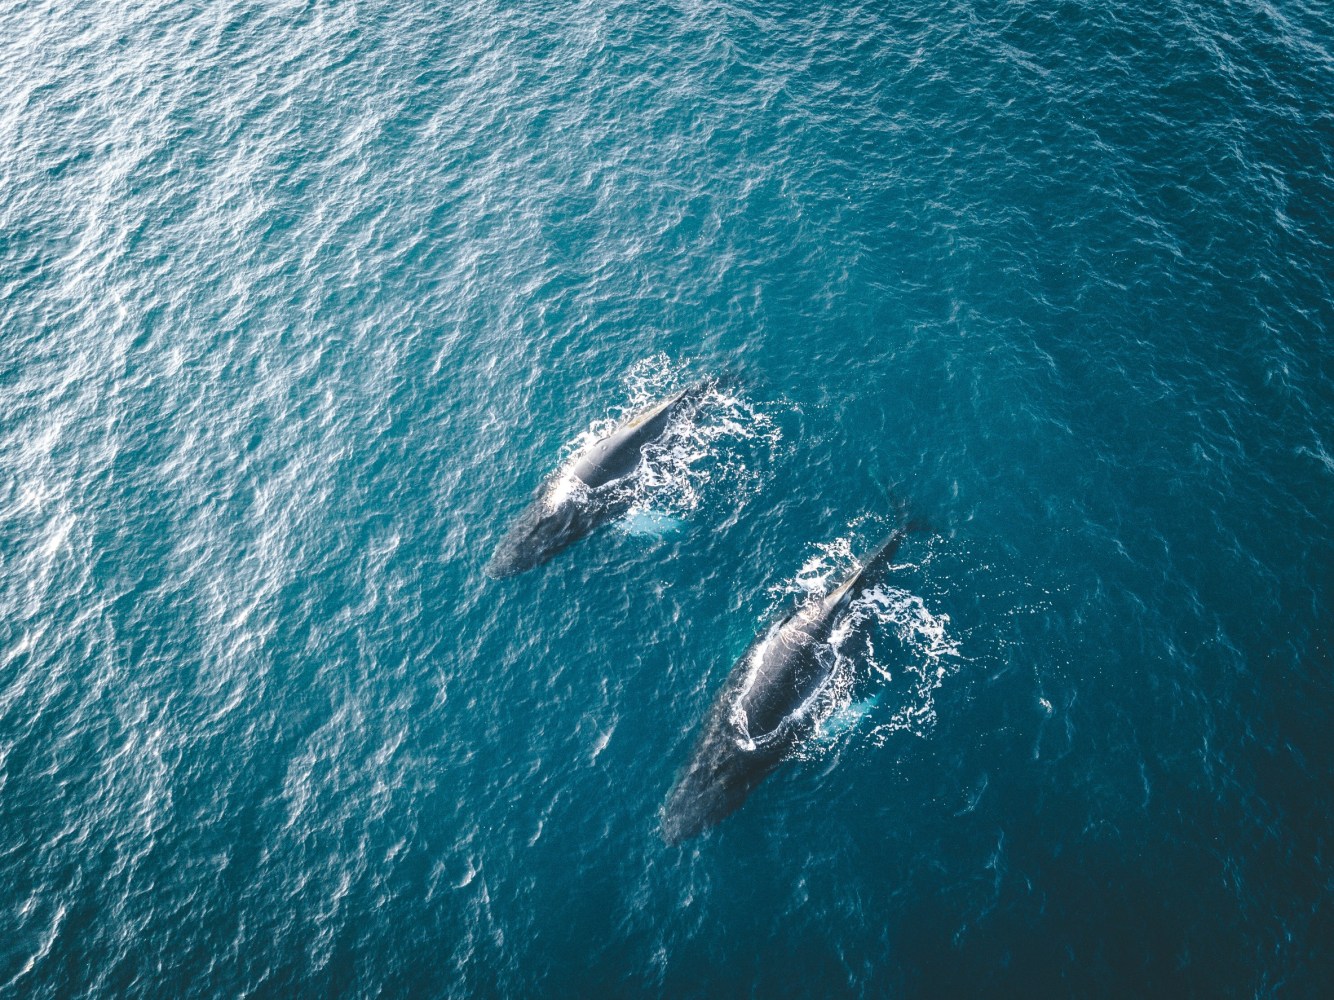 two whales swimming in the ocean